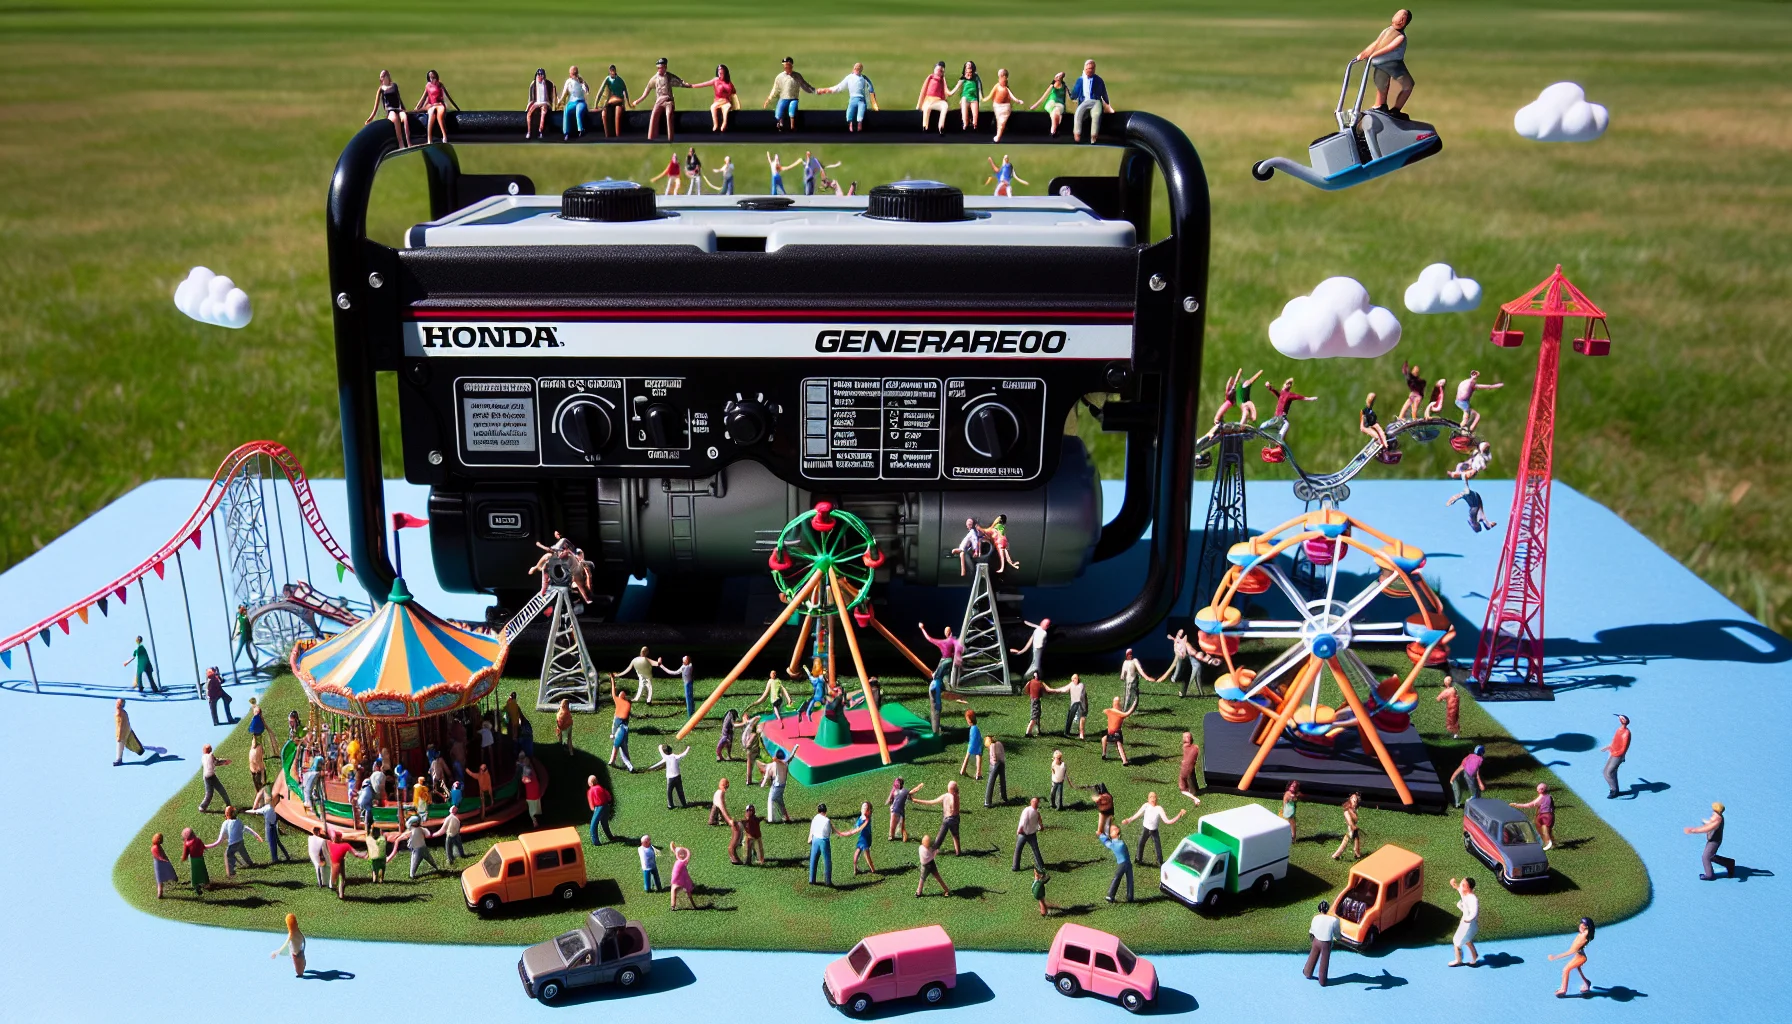 Generate a humorous and detailed image featuring a commercial generator akin to a 'Honda EB10000' placed in an interesting scenario to encourage people to produce electricity. The generator should stand out by, perhaps, running a miniature amusement park filled with delighted mixed-gender, multi-descent miniatures like South Asian, Caucasian, Hispanic and Black figures joyfully riding on tiny Ferris wheels, carousels, and roller coasters, all powered by the relatively massive generator. Floating text bubbles with funny remarks about electricity conservation & generation can be added for comedic effect. The background could be a grassy park on a sunny, cheerful day.